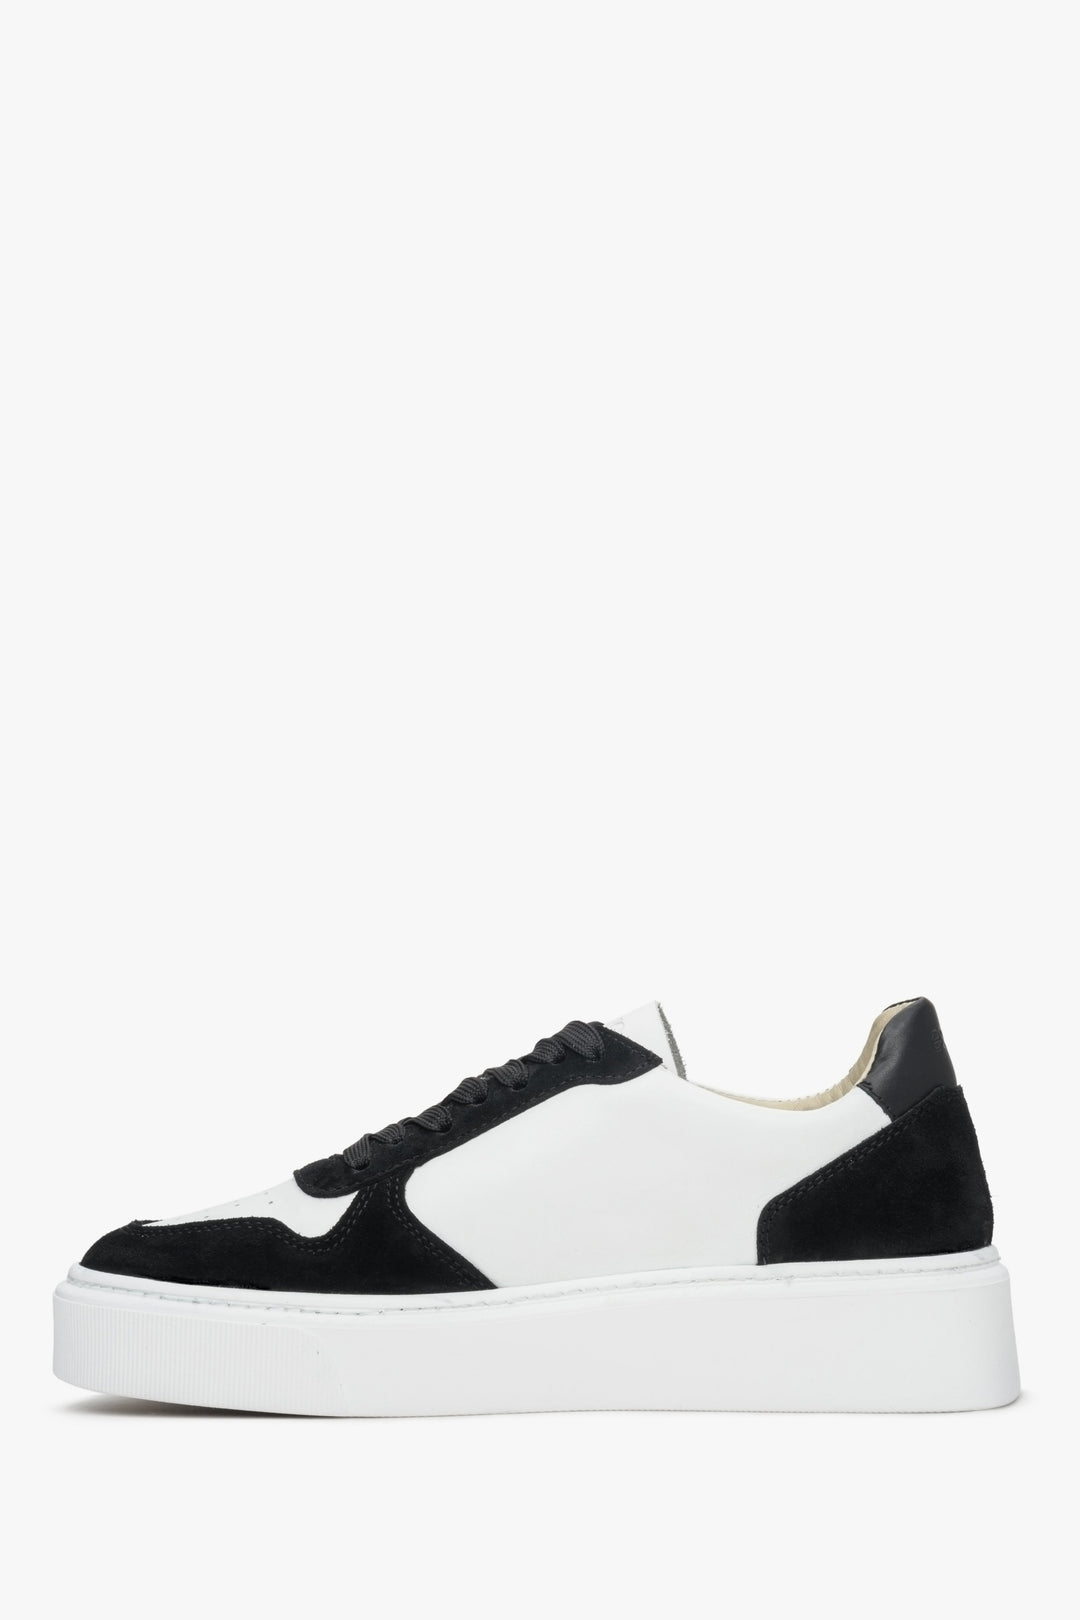 Women's sneakers made of combined materials, leather and velour in a shade of white and black.